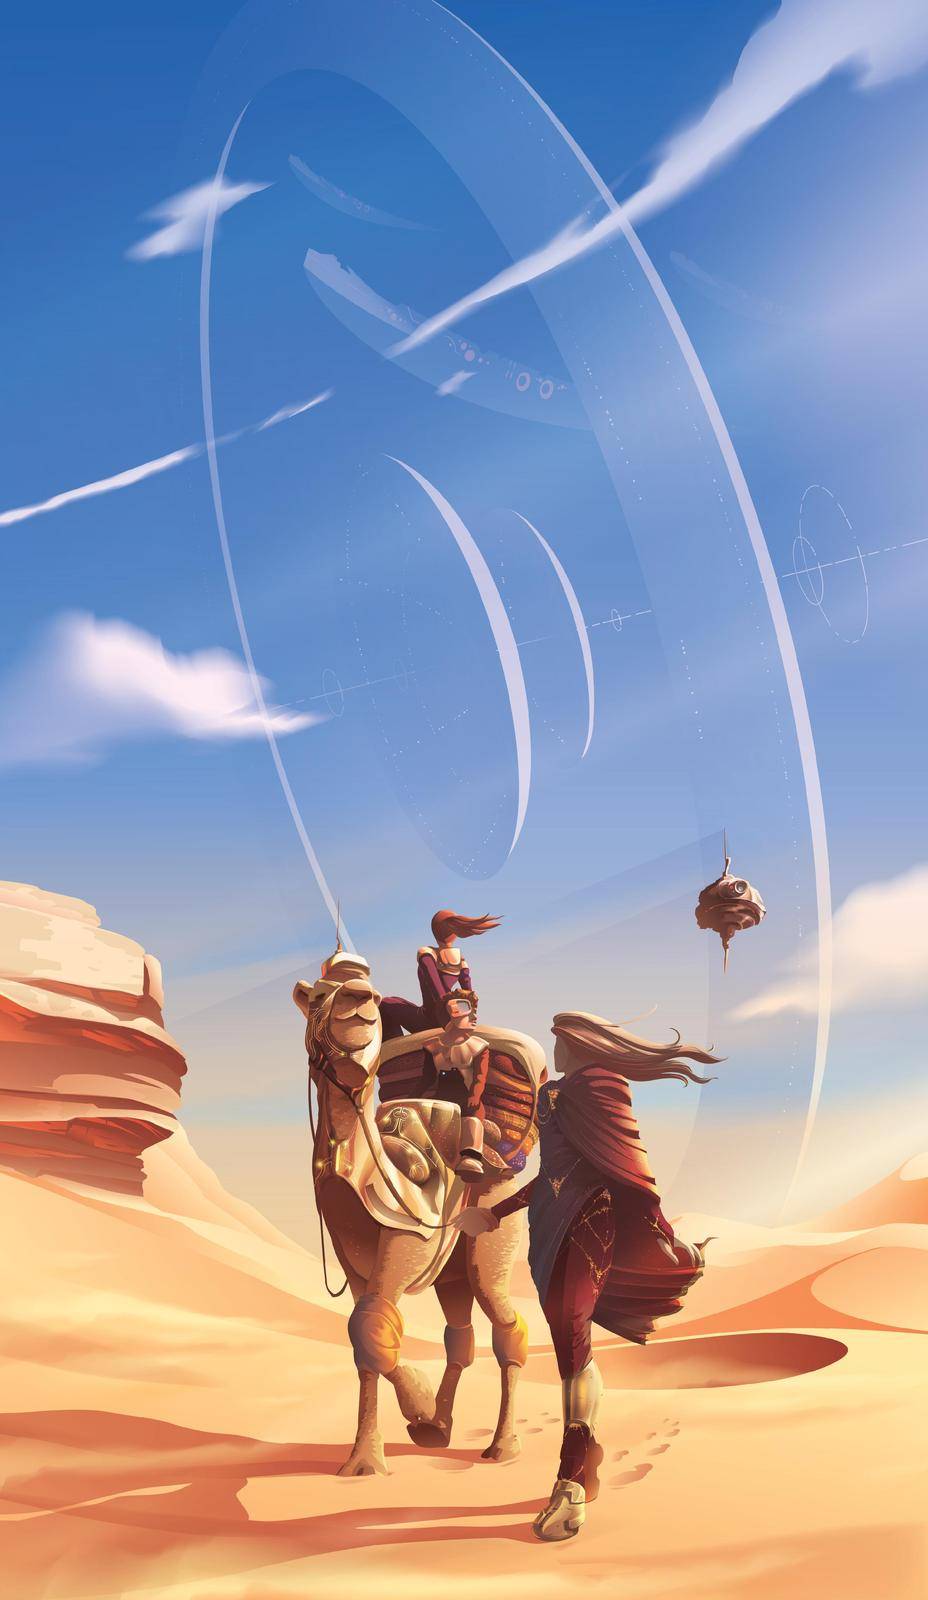 Science fiction vector illustration of a family is traveling in a desert for their pilgrimage with a view on the background of a futuristic massive structure in the orbit.